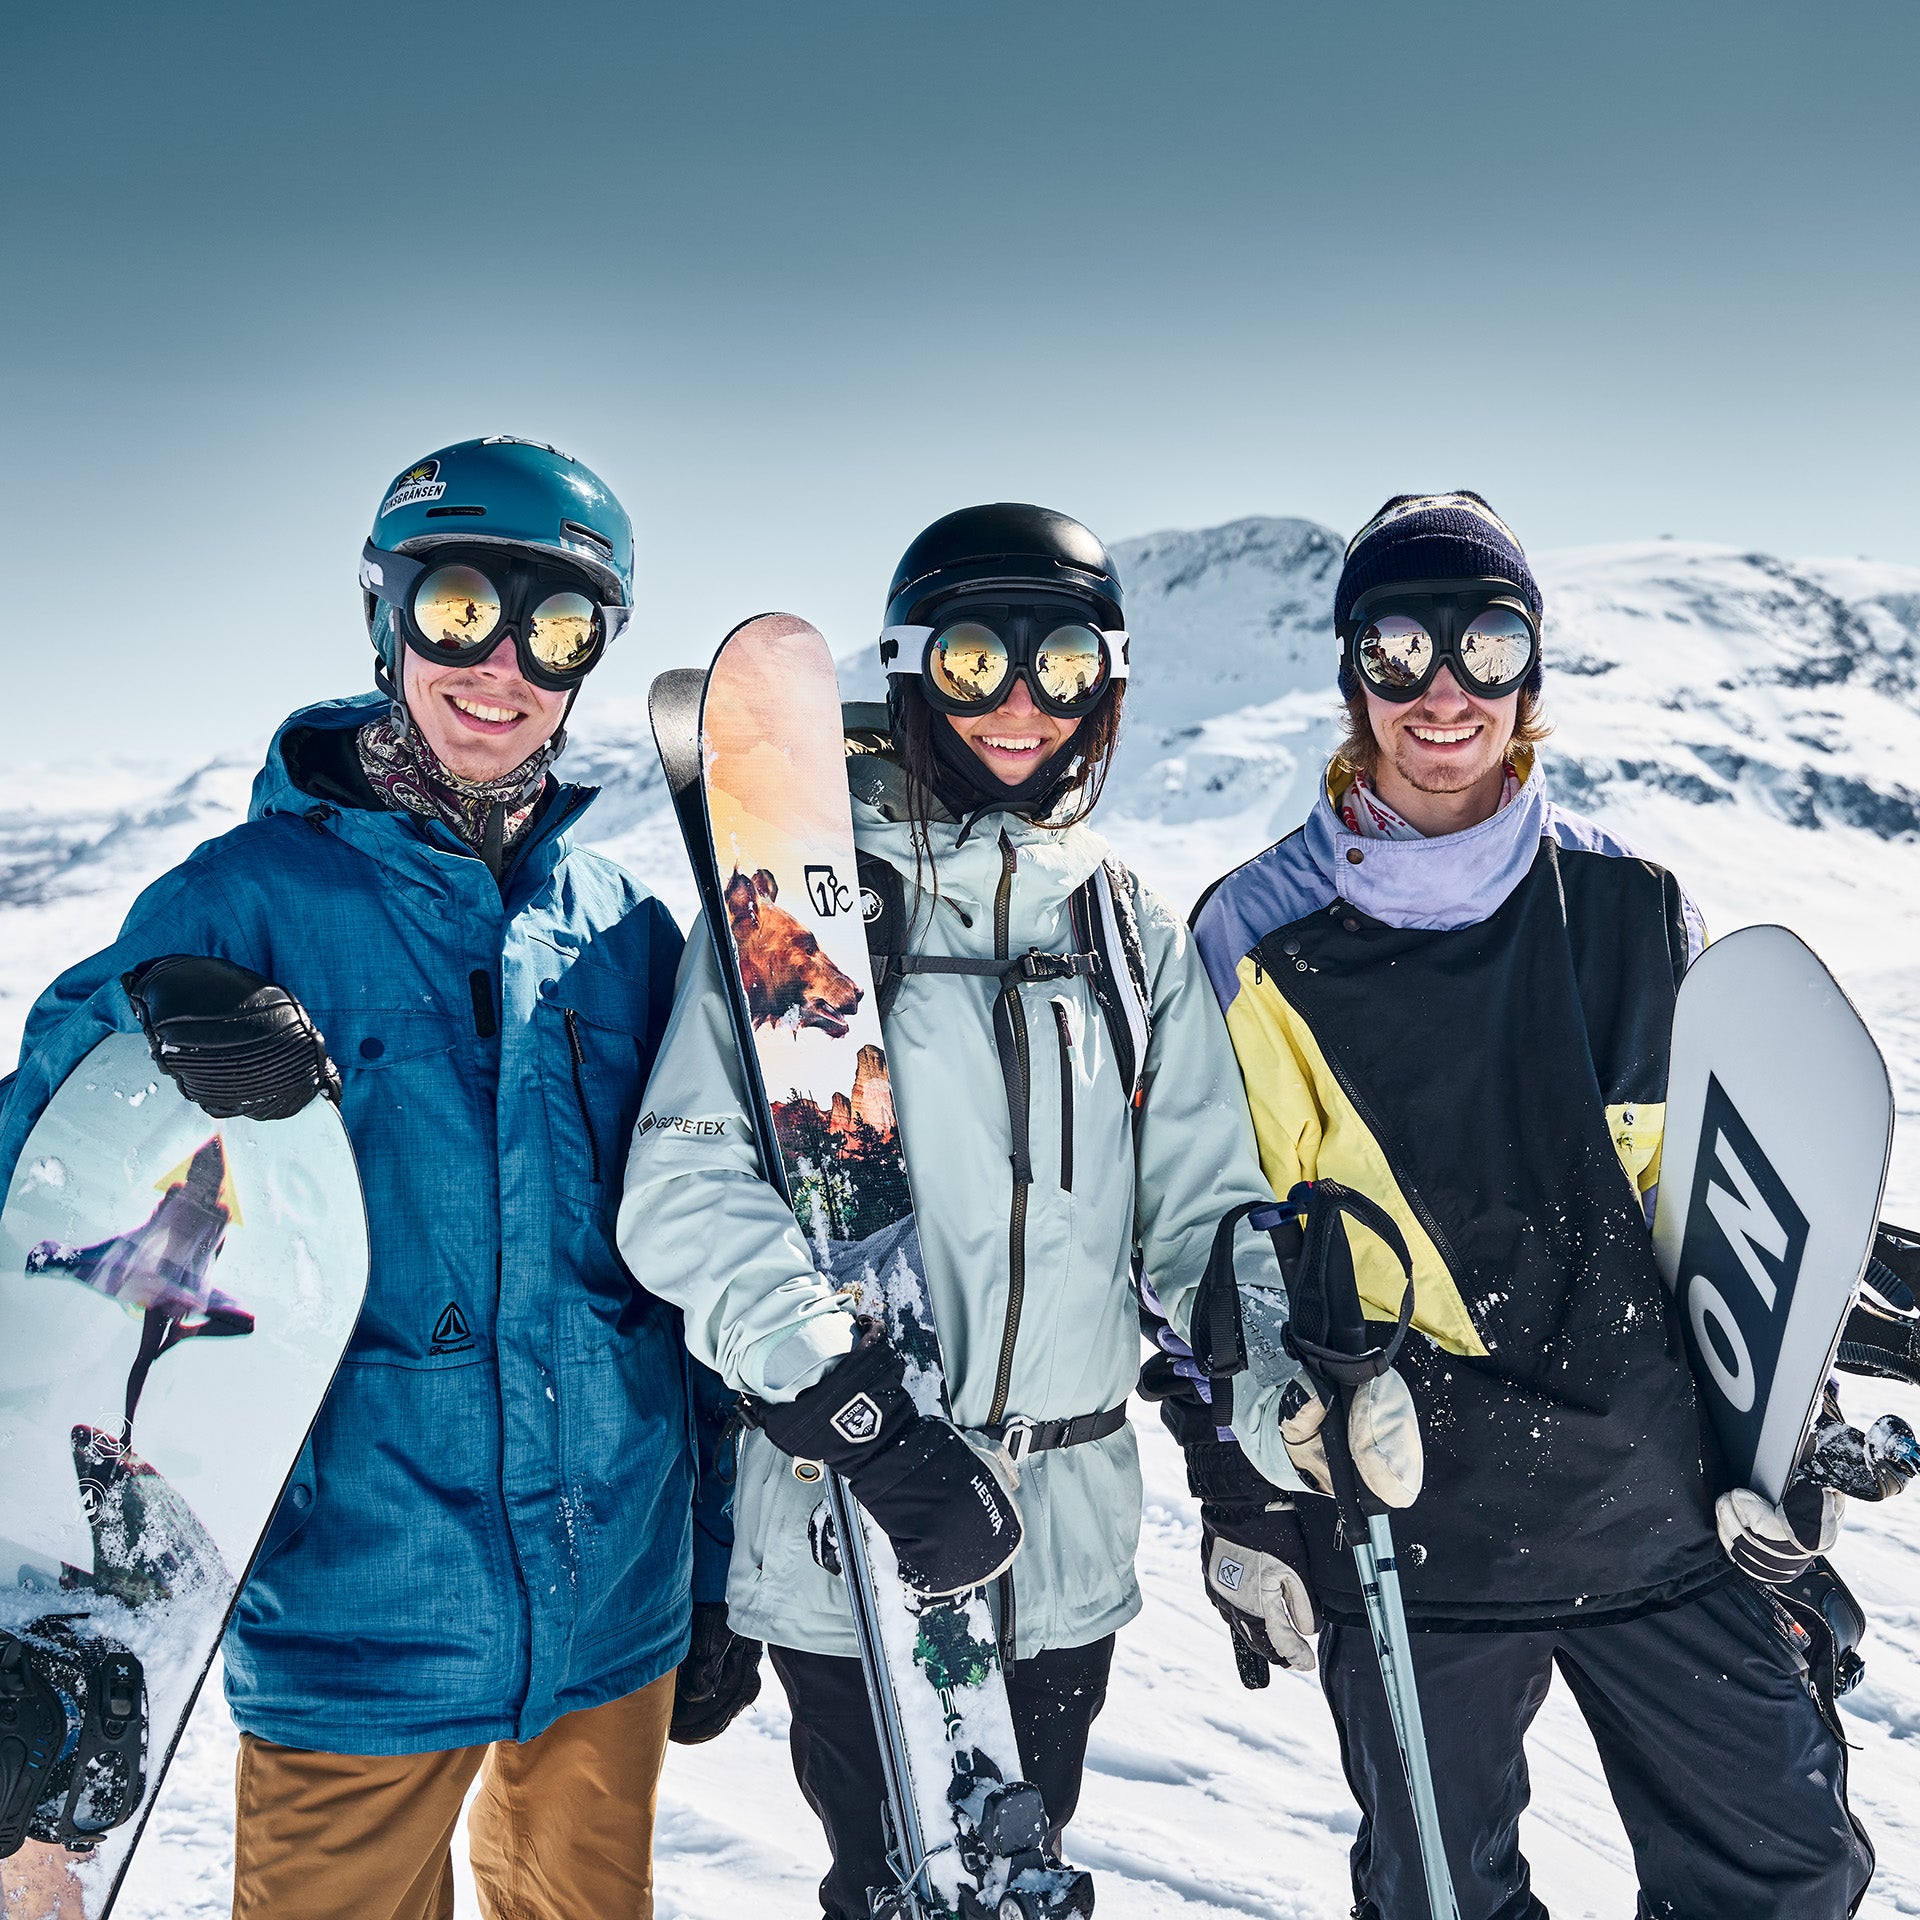 One skier and two snowboarders wearing Fluga goggles